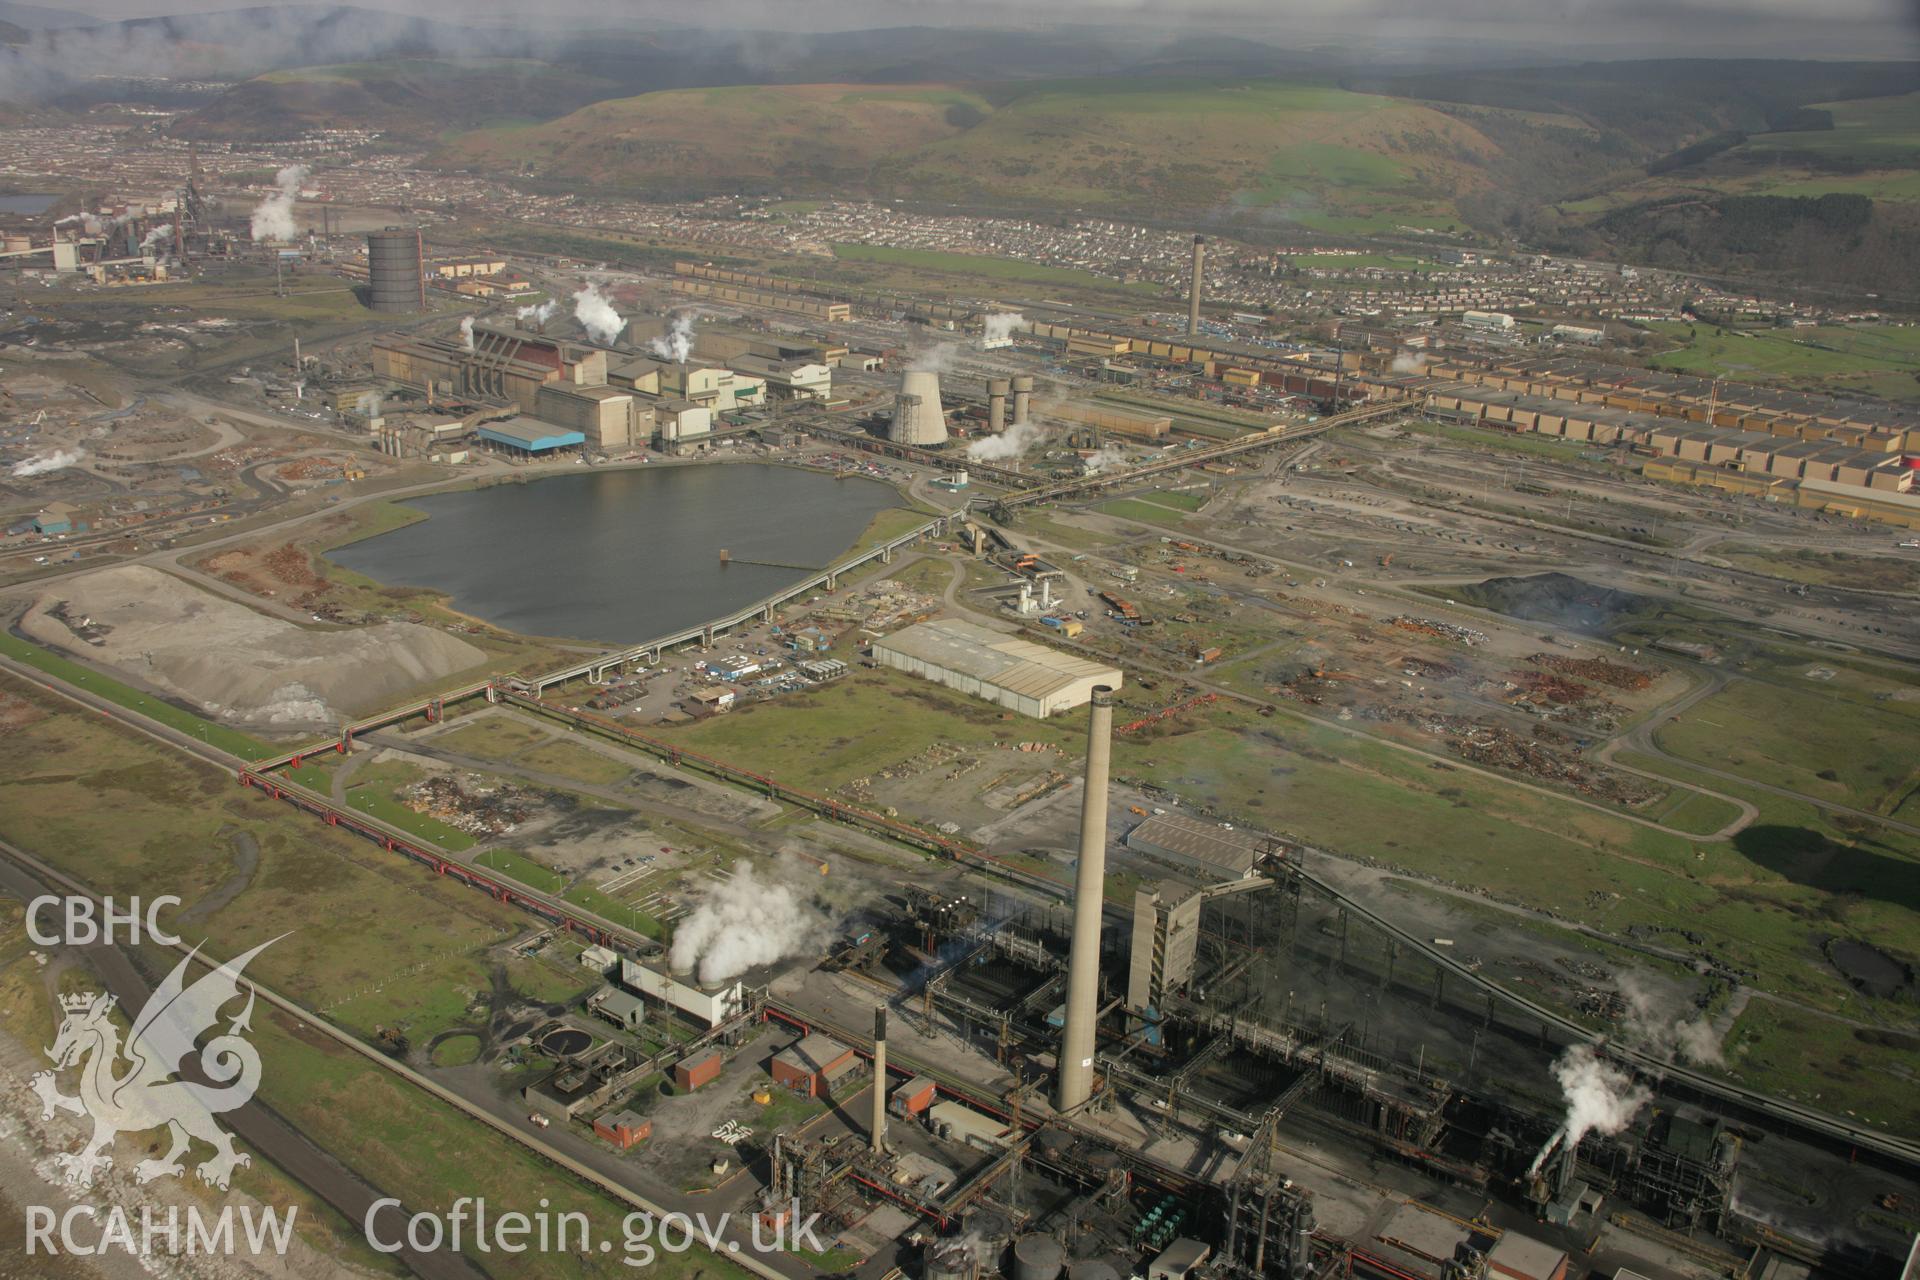 RCAHMW colour oblique aerial photograph of Abbey Works, Margam Steel Works, Margam. Taken on 16 March 2007 by Toby Driver